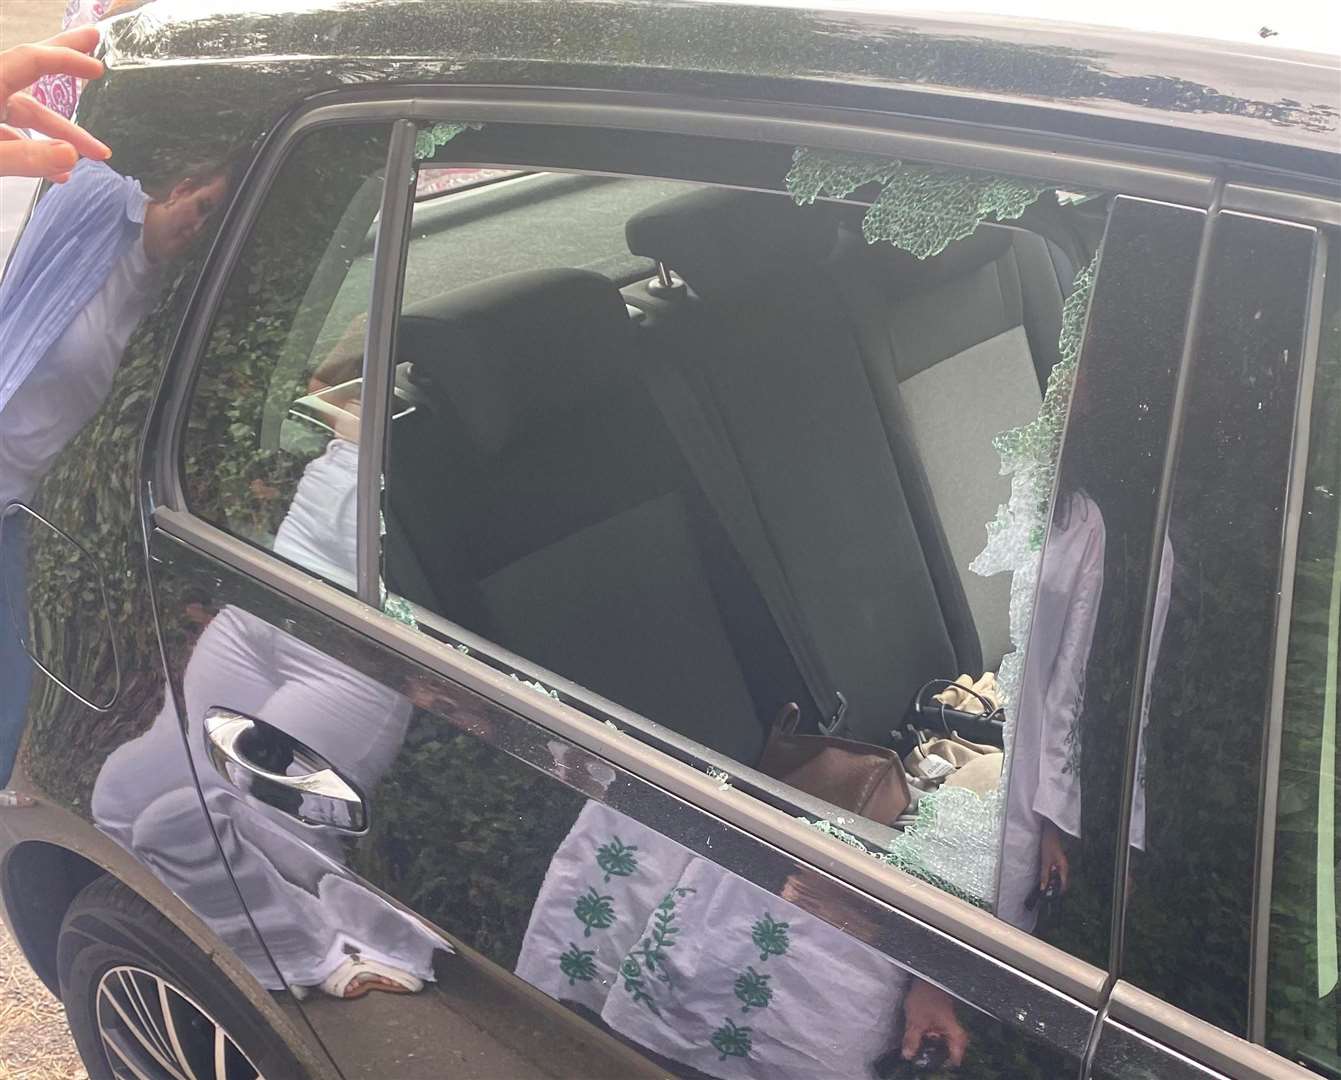 Siobhan Ferguson's car window was smashed and content from her car was stolen on July 3